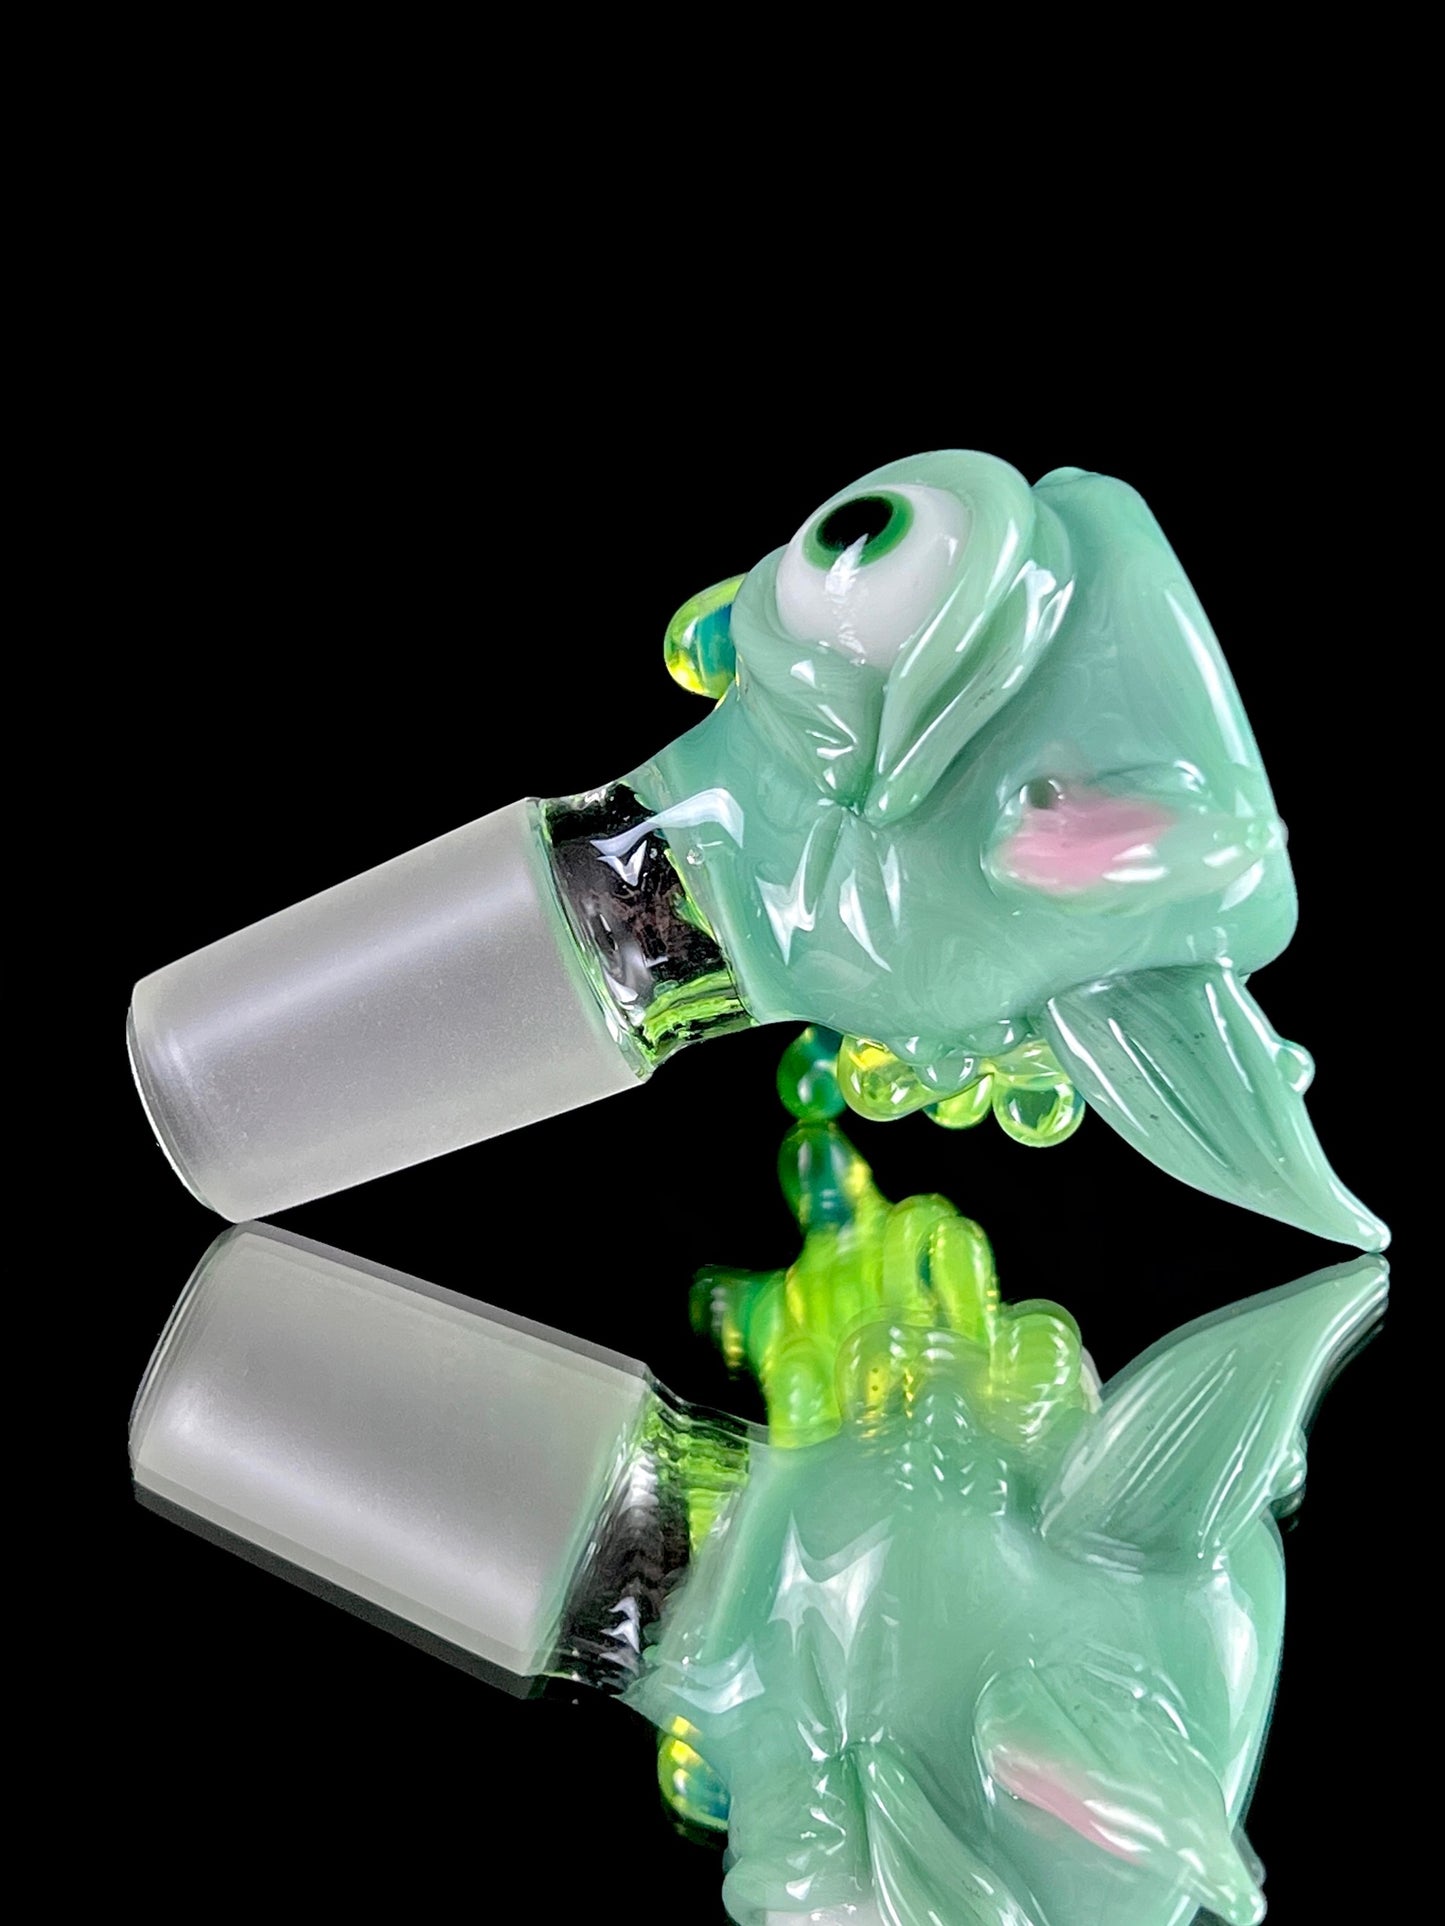 18mm barf slide by Leviathan Glass